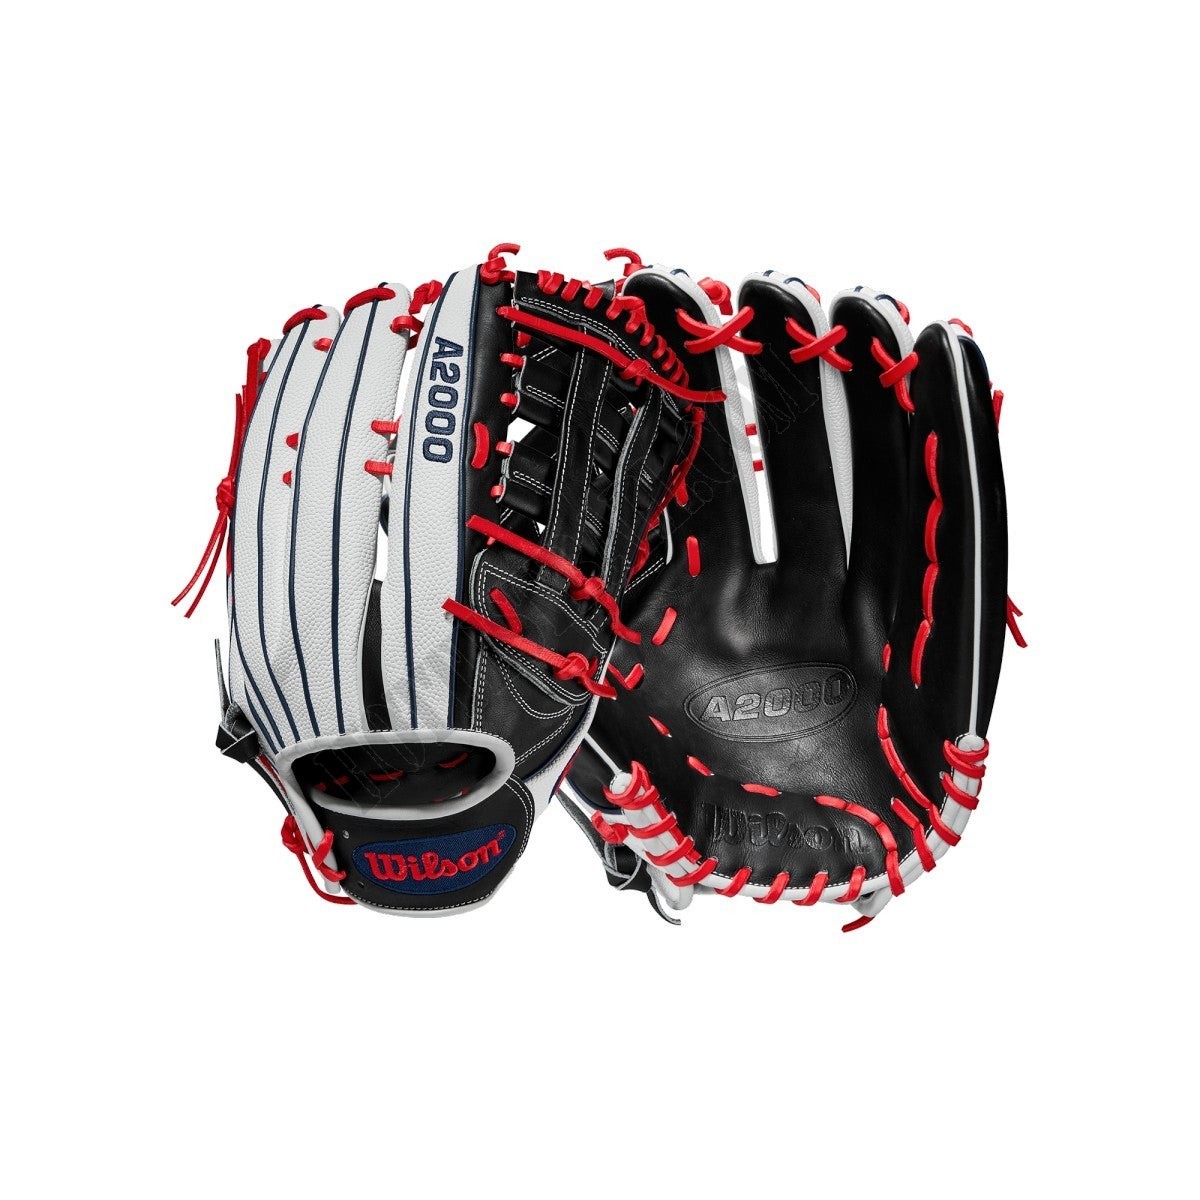 2020 A2000 SP135 13.5" Slowpitch Softball Glove ● Wilson Promotions - -0